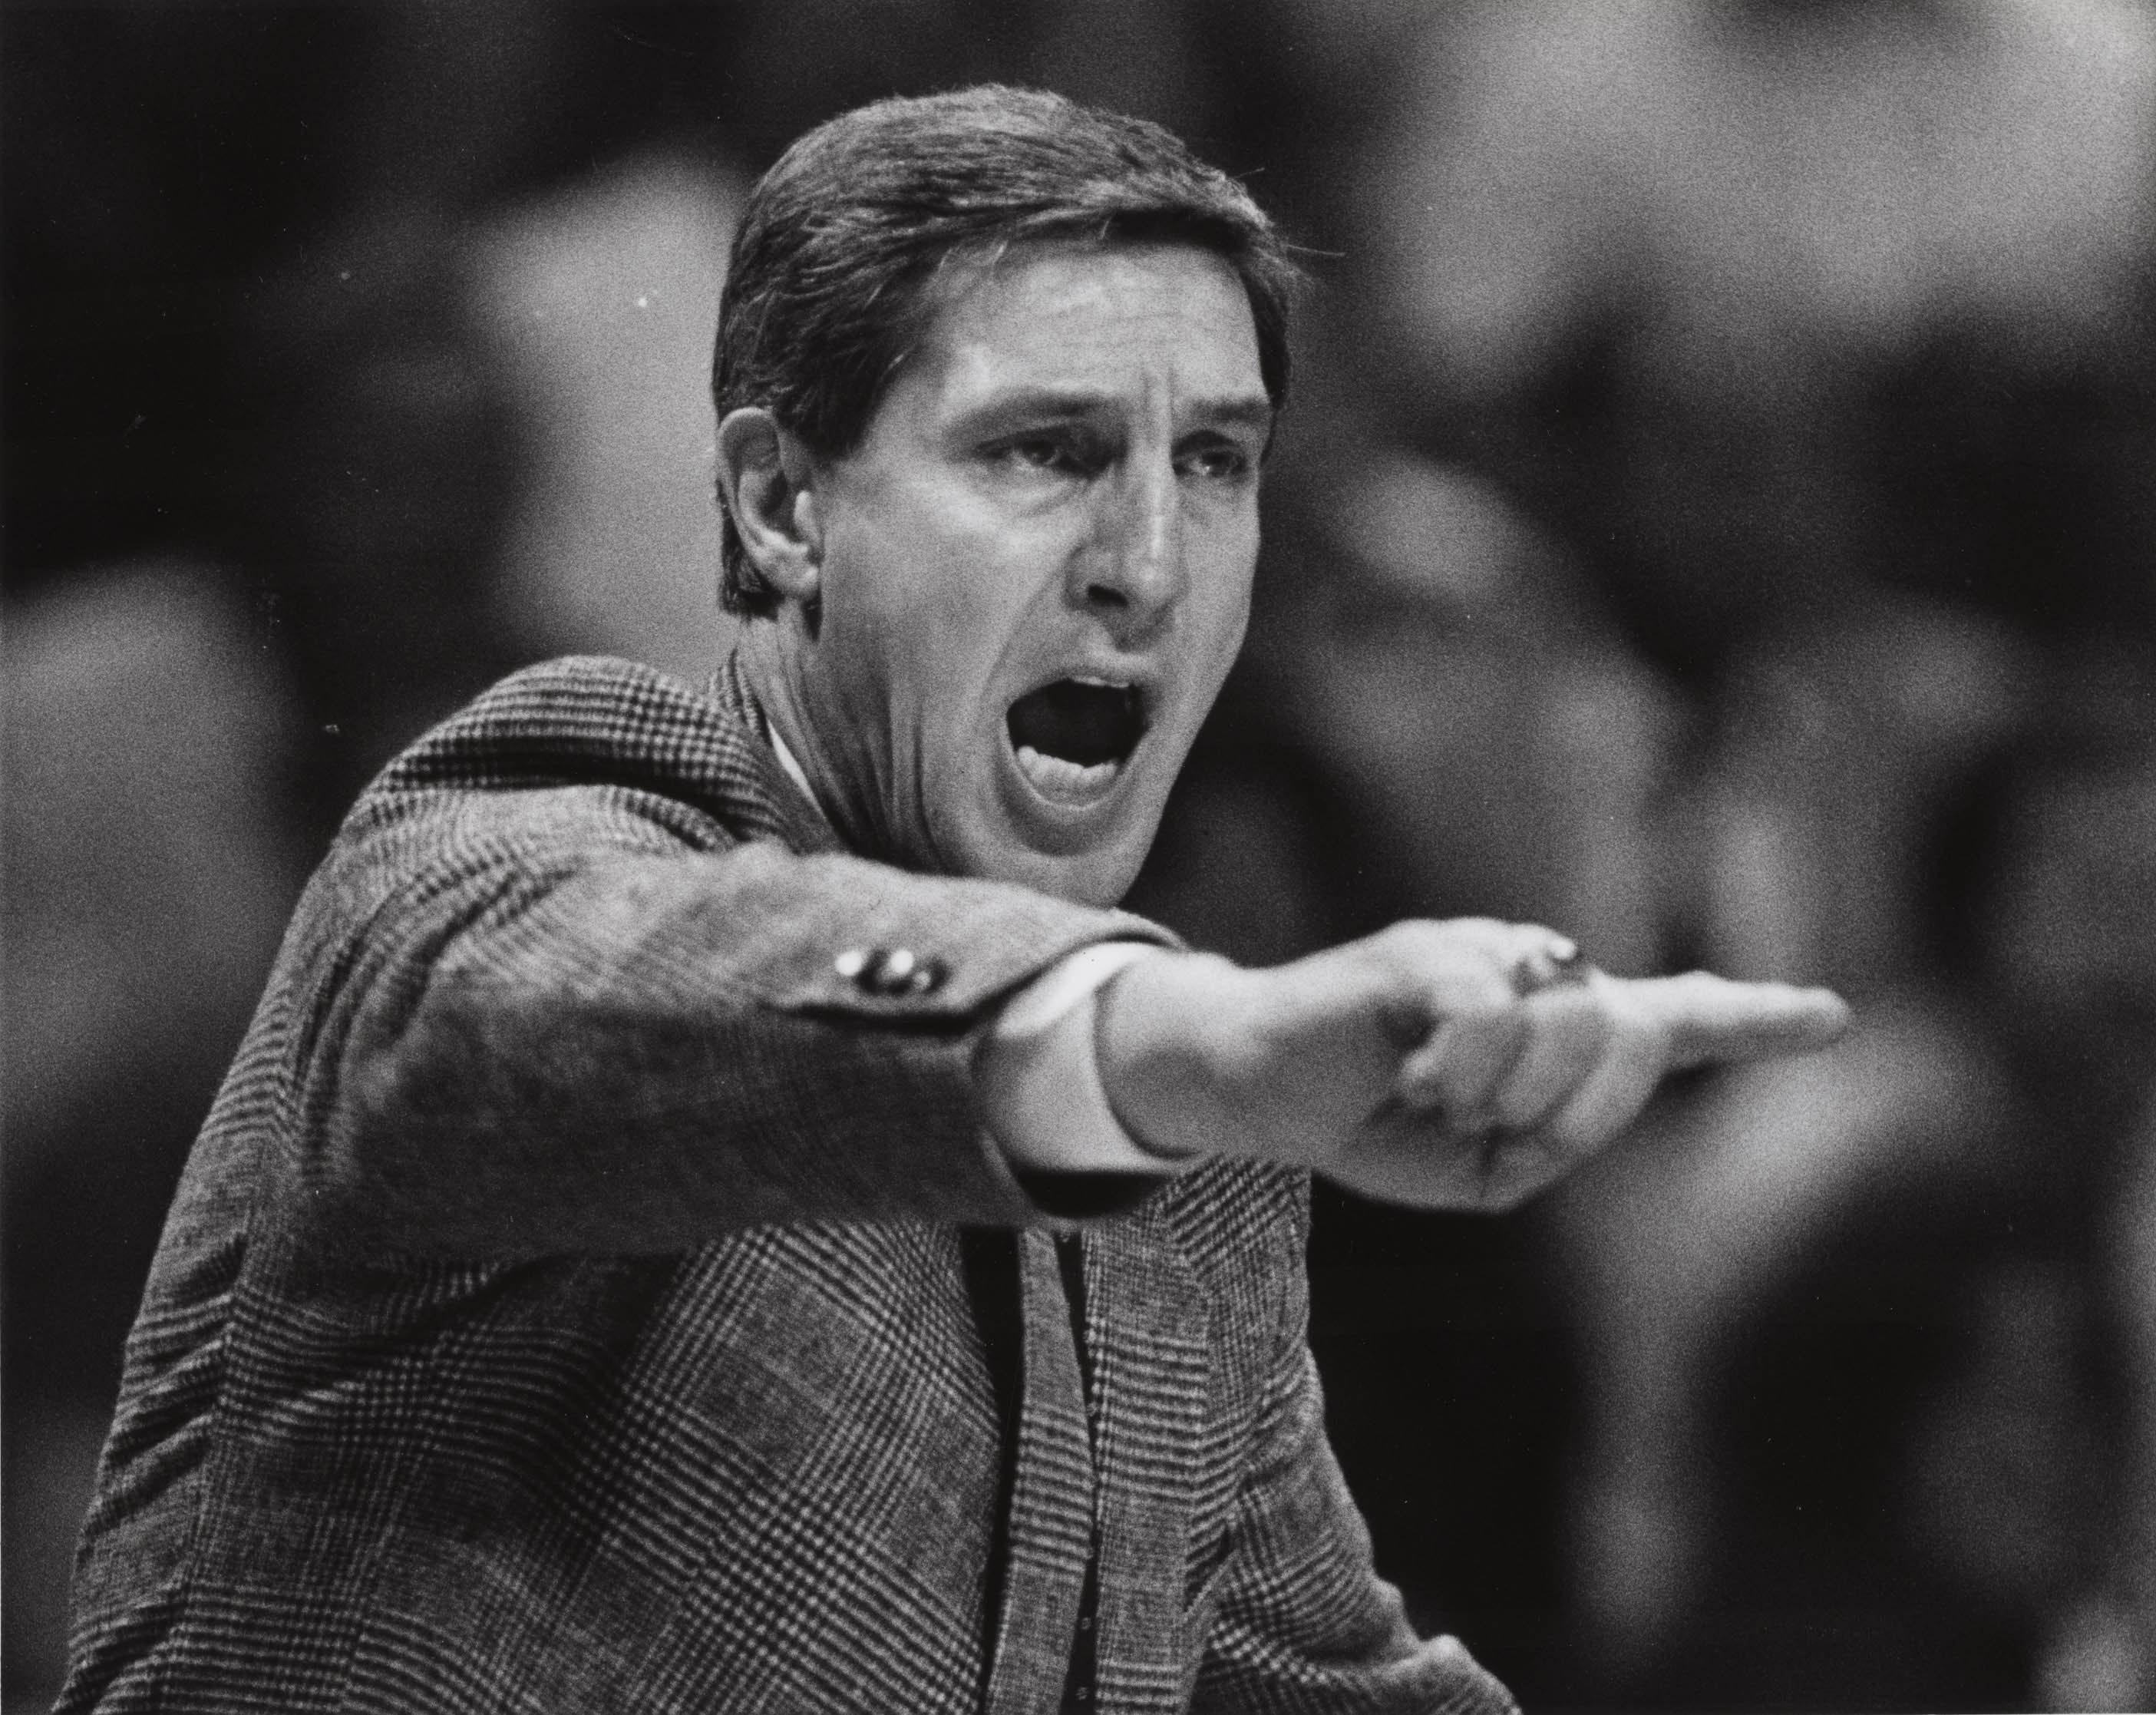 Legacy of Coach Jerry Sloan lives on in Illinois hometown